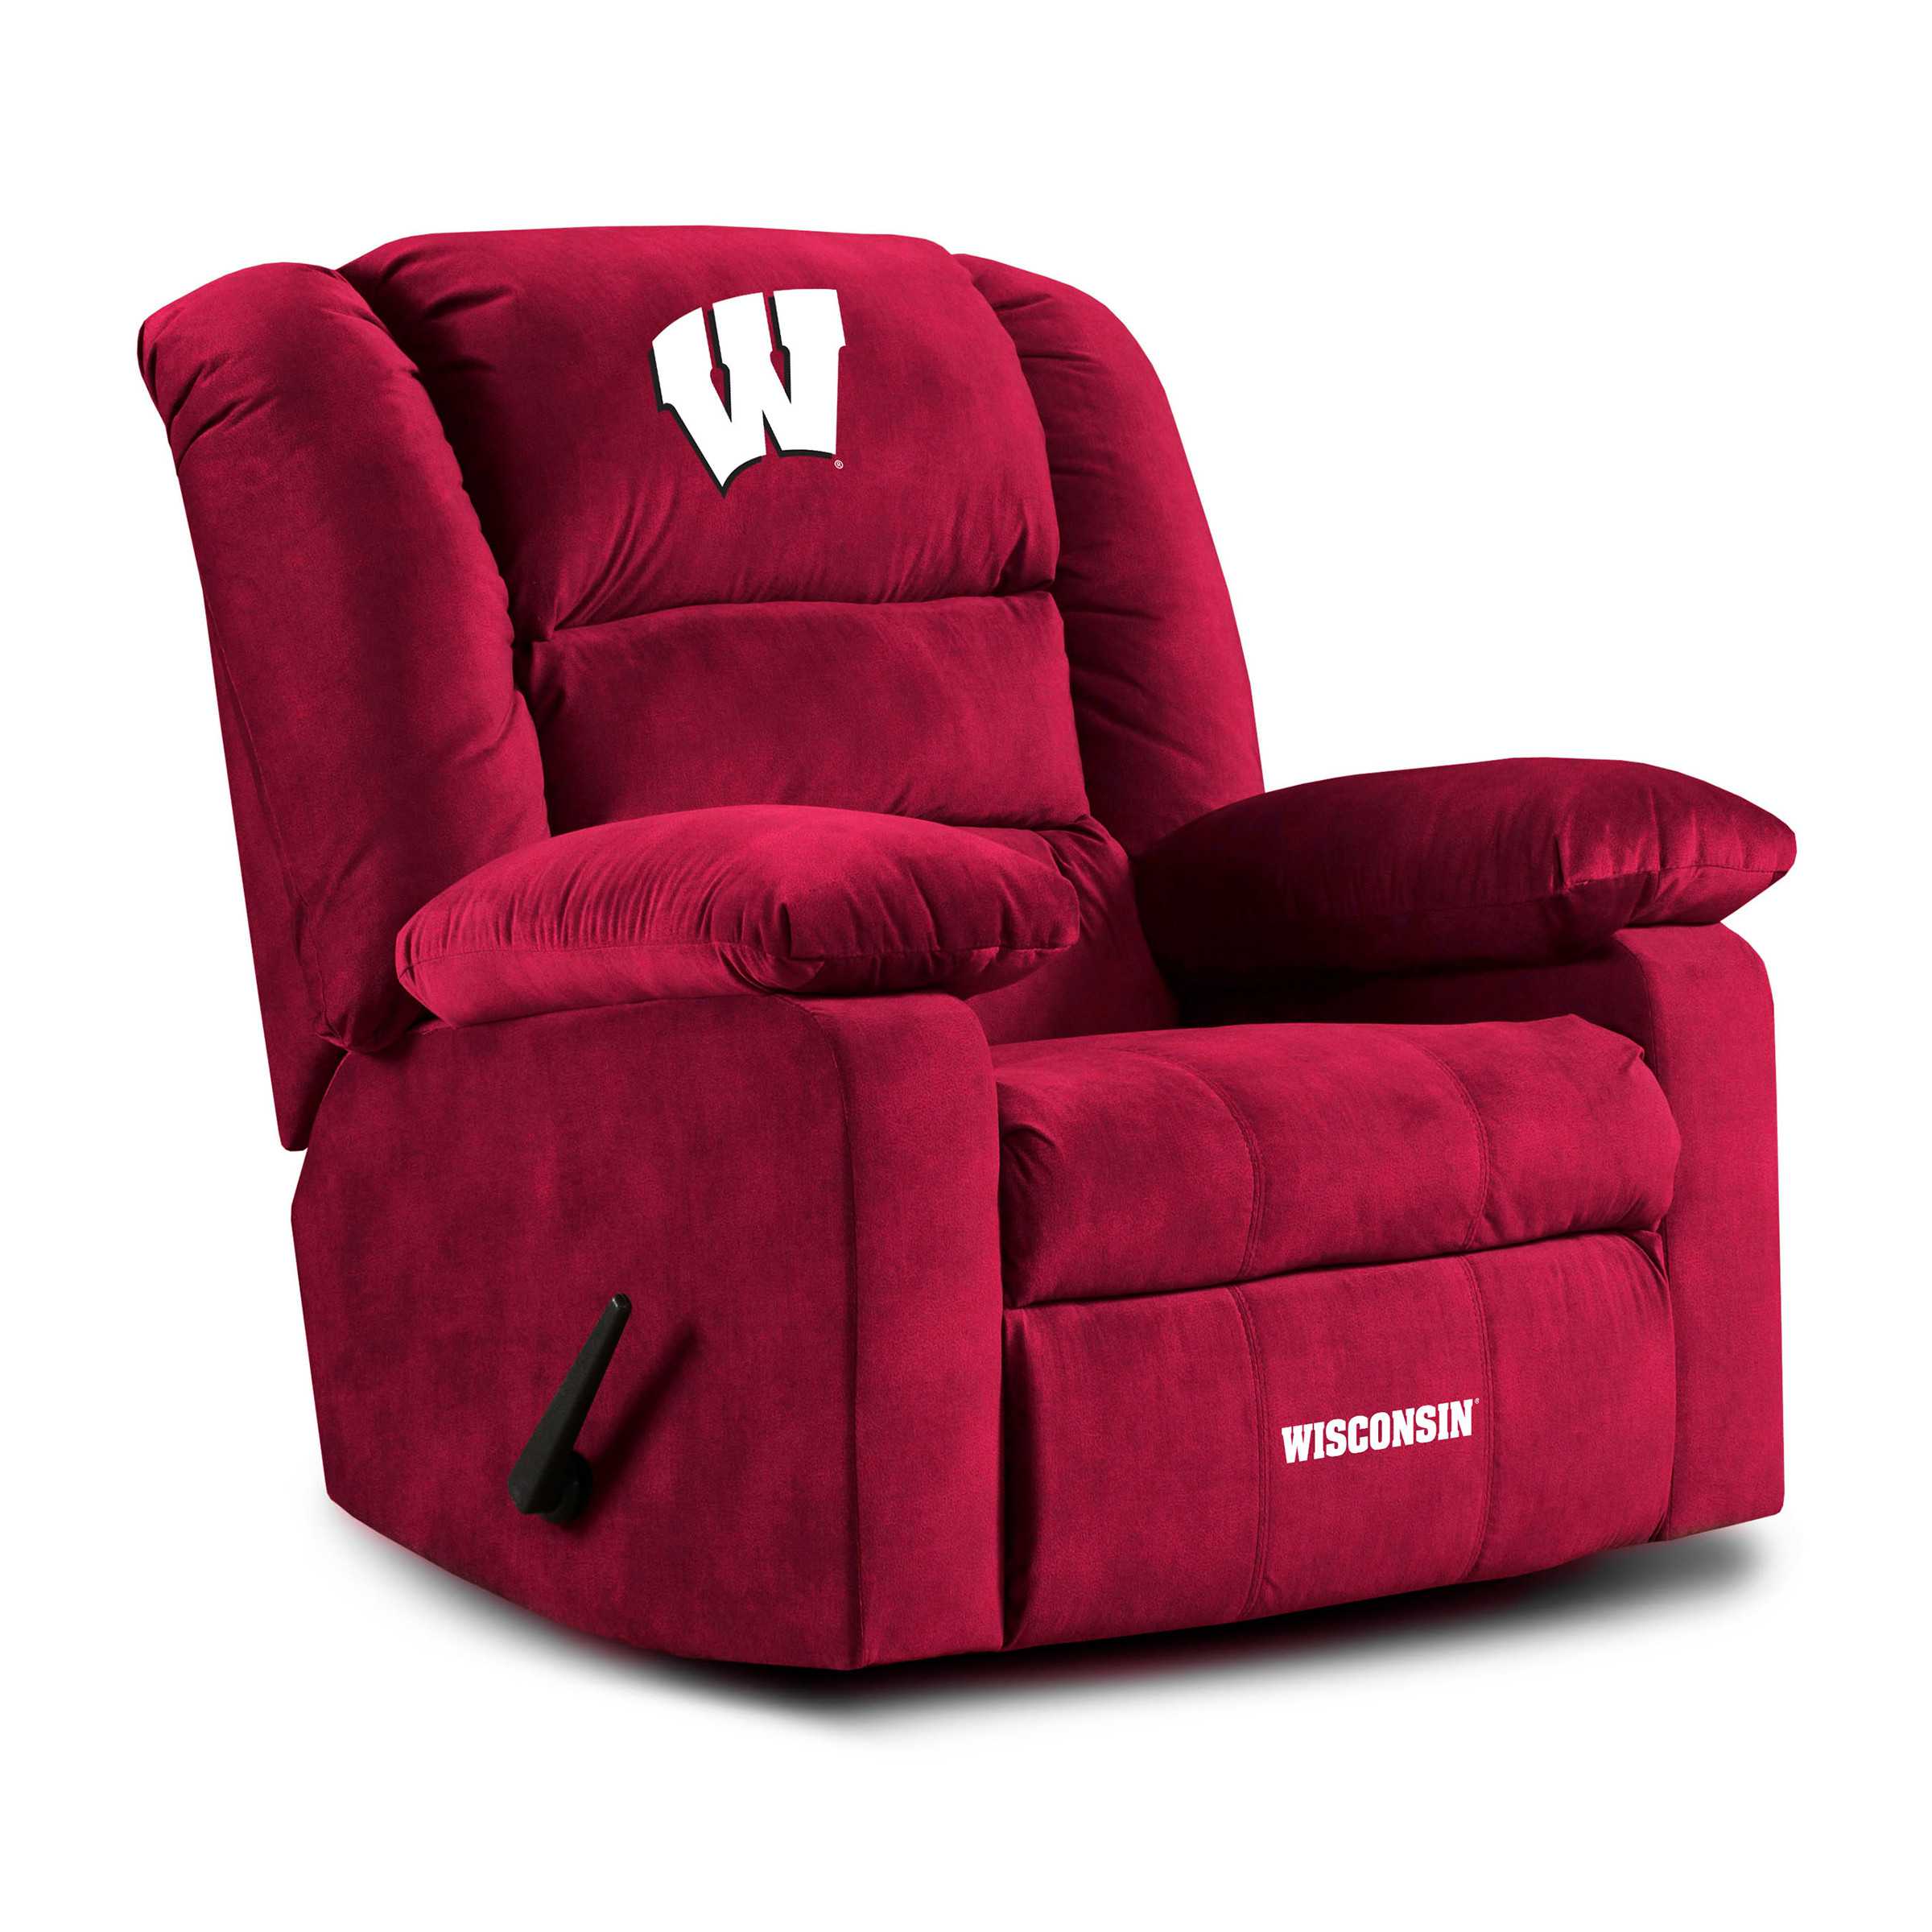 UNIVERSITY OF WISCONSIN PLAYOFF RECLINER